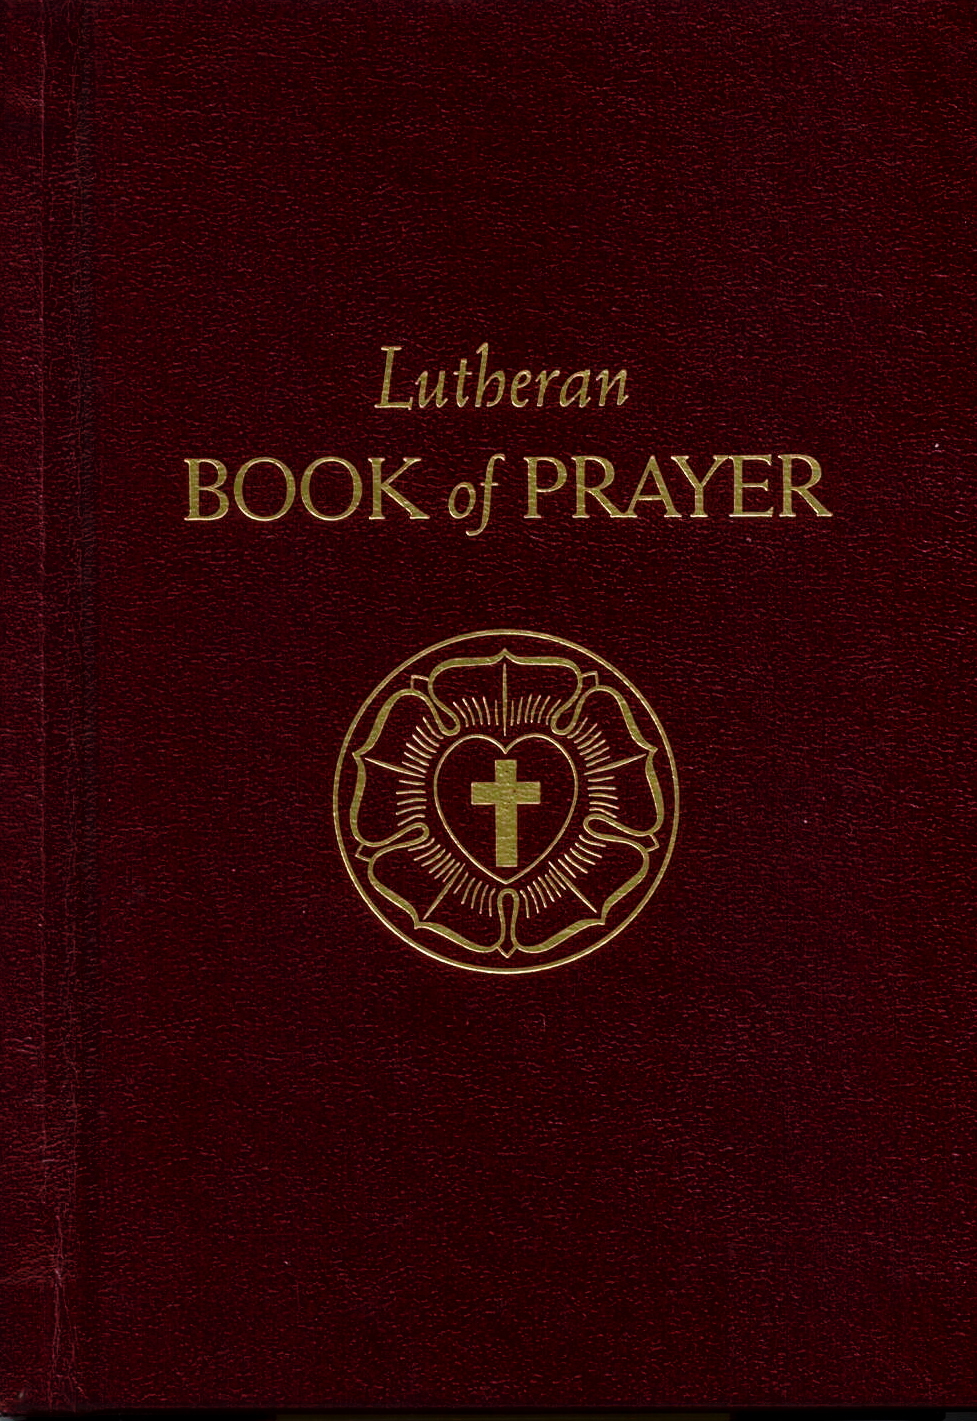 Lutheran Book of Prayer by Concordia Publishing House